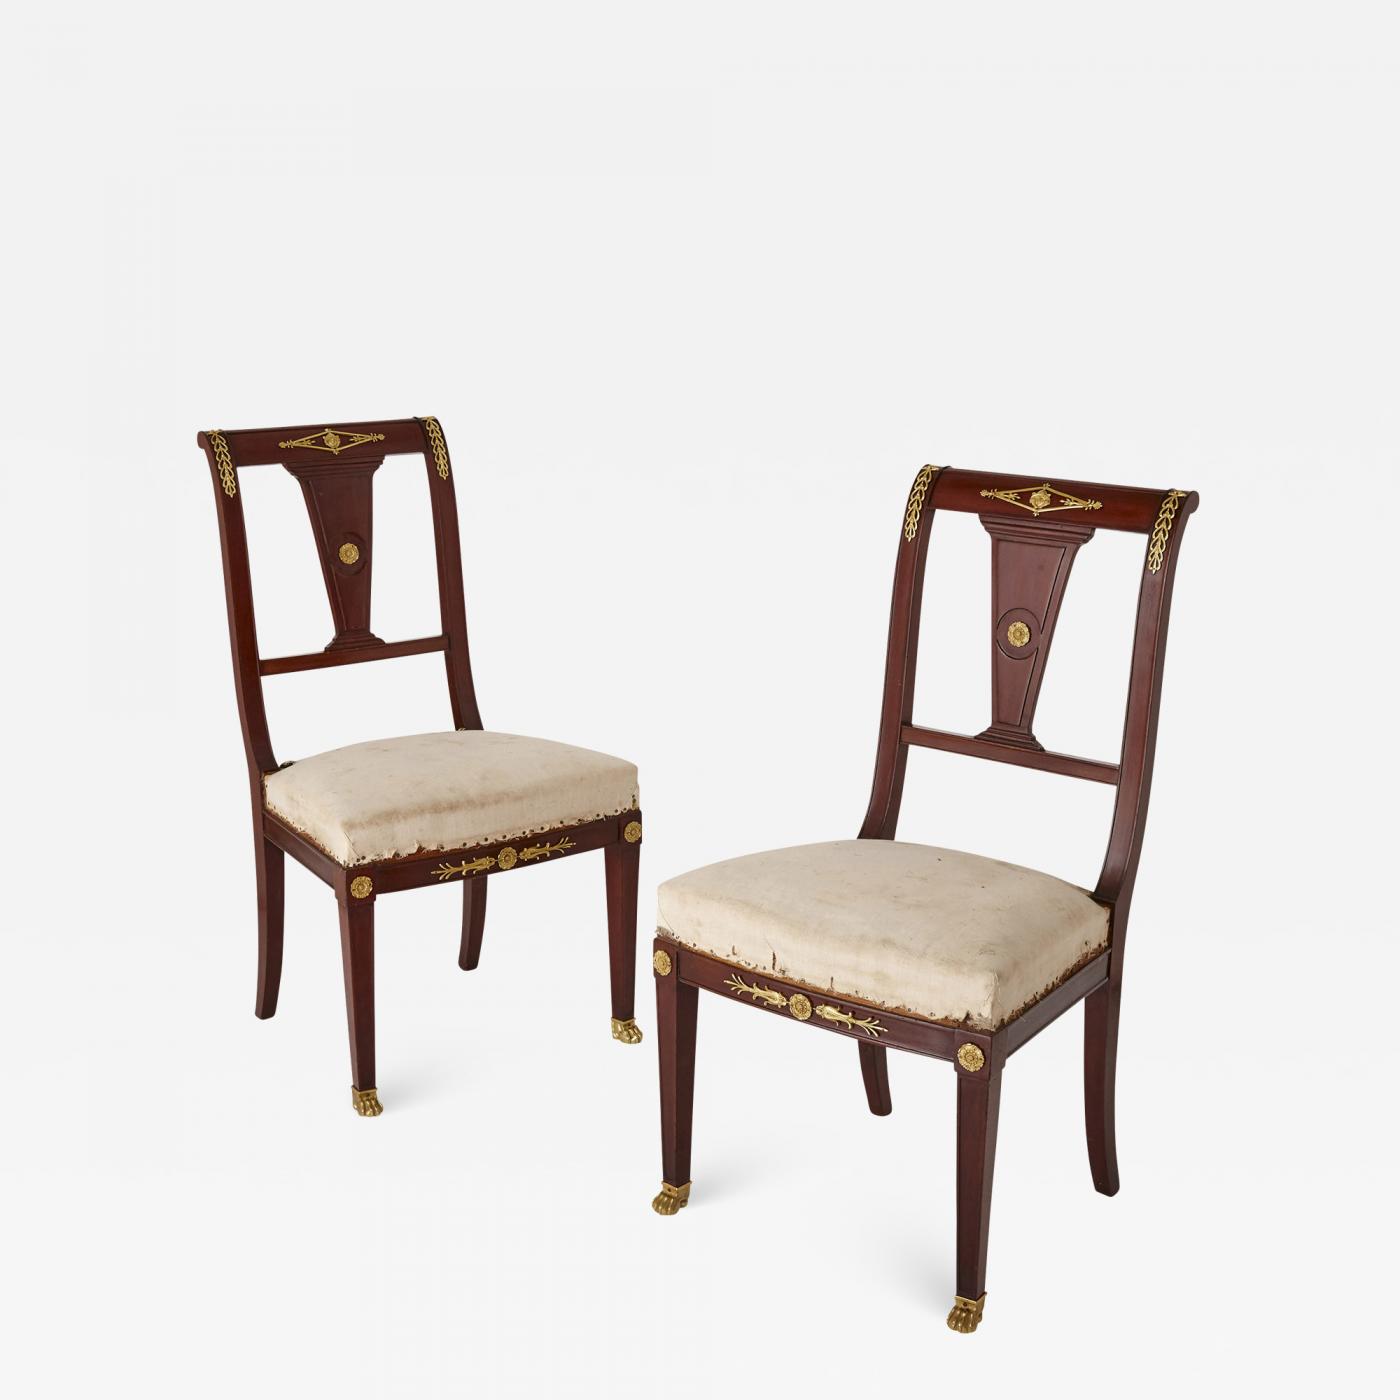 Antique French Empire Style Mahogany, French Empire Style Dining Chairs